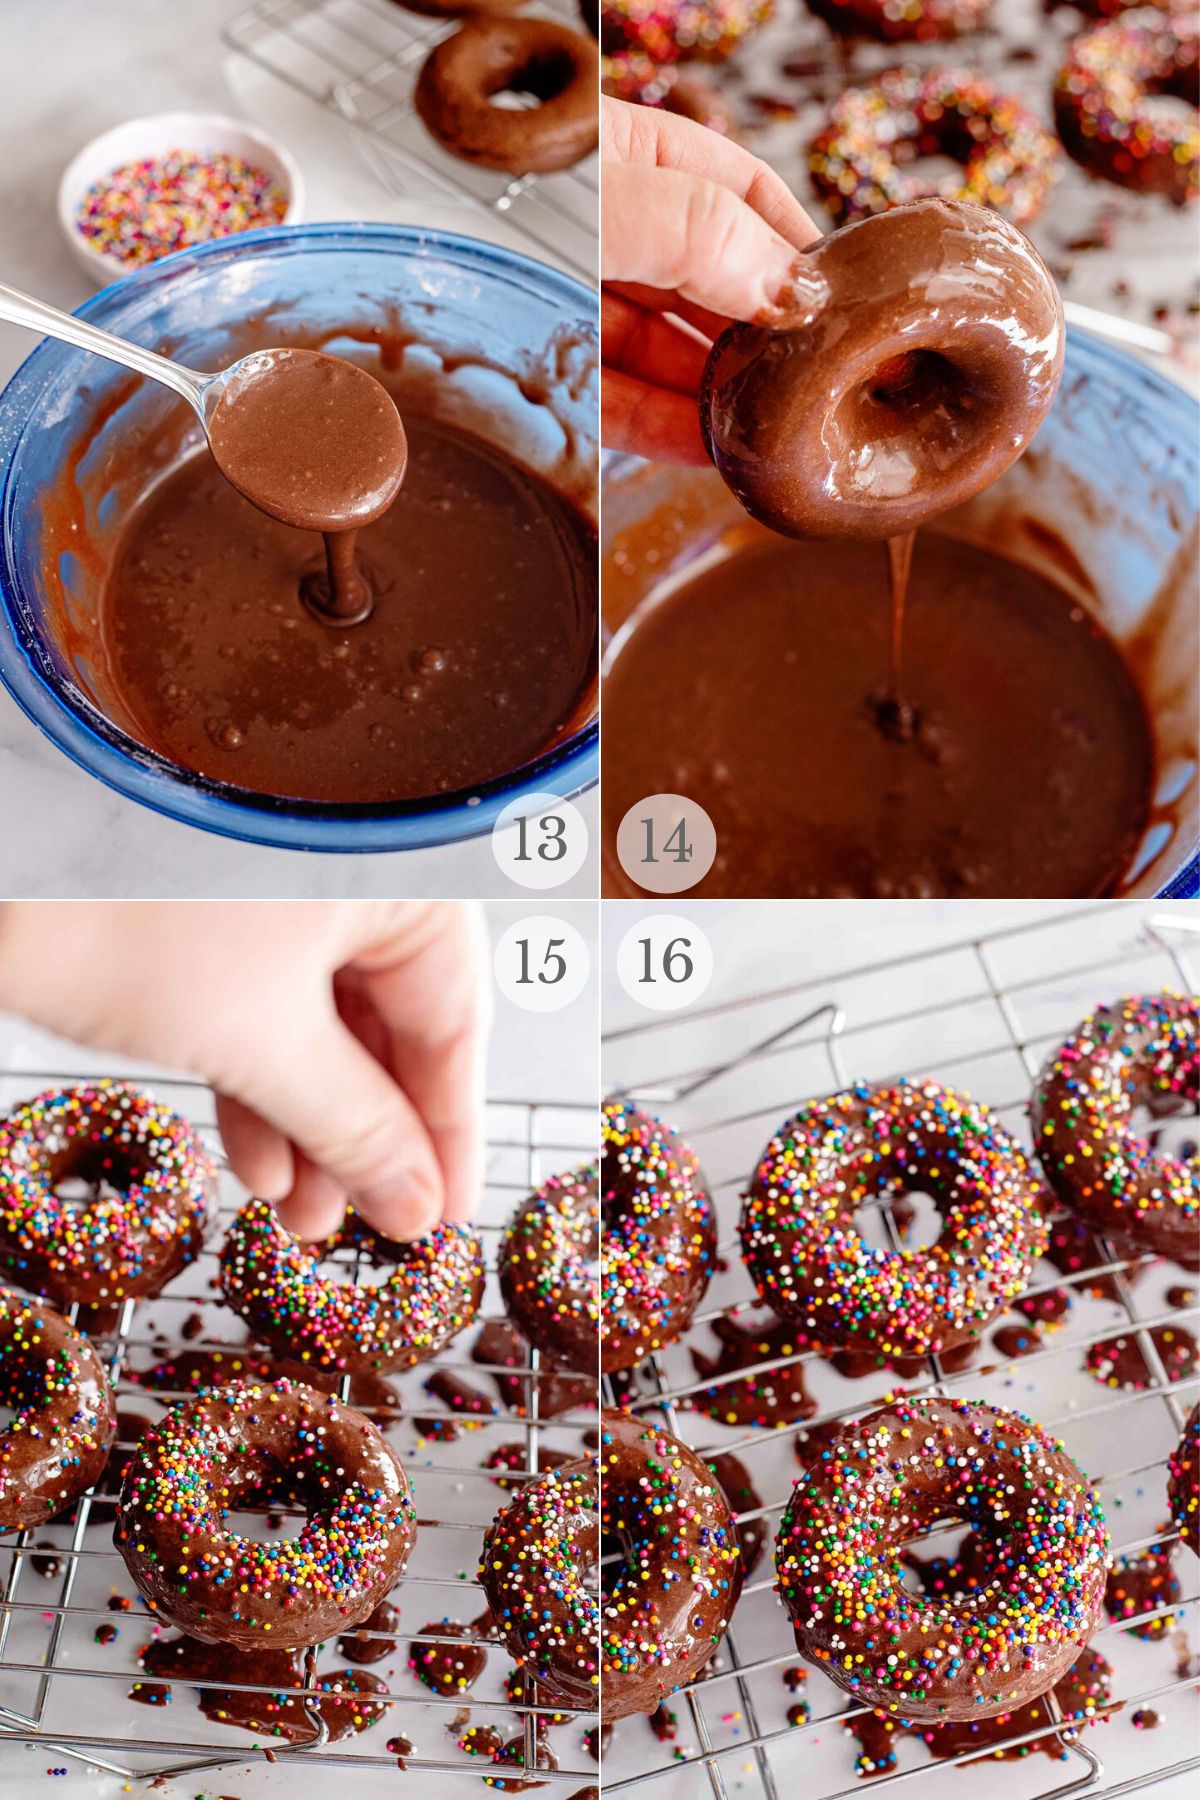 chocolate frosted donuts recipe steps 13-16.